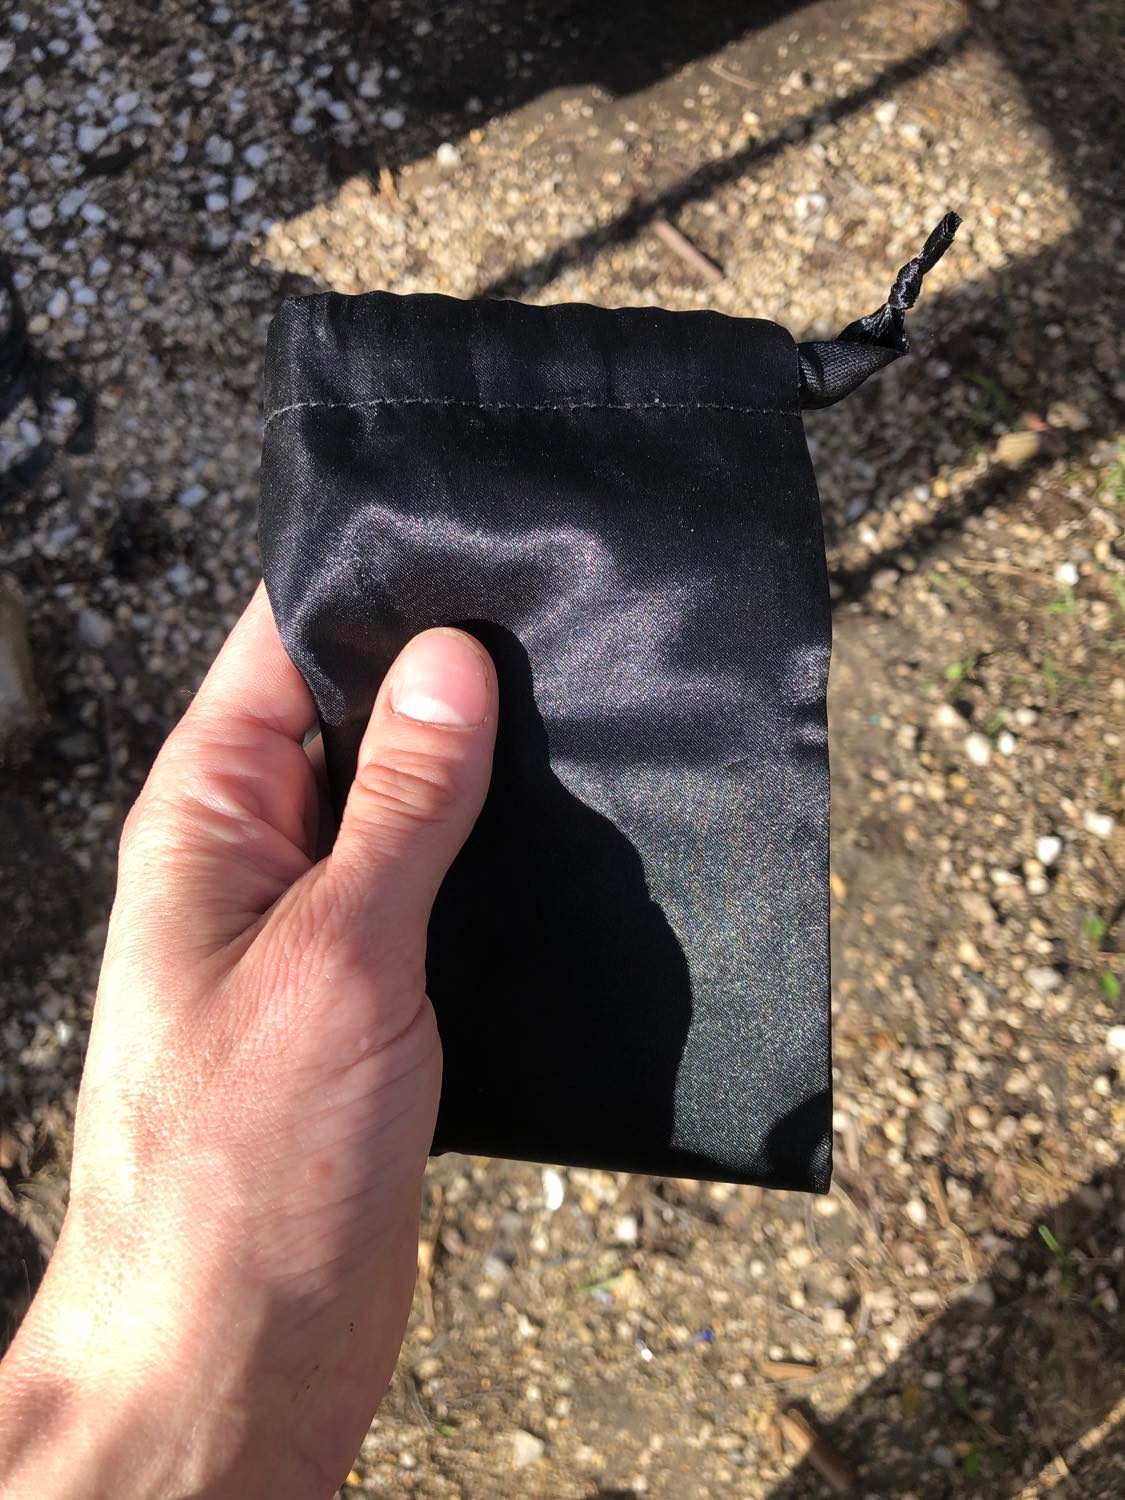 A black velvet pouch, held in front of you on a well-worn path.